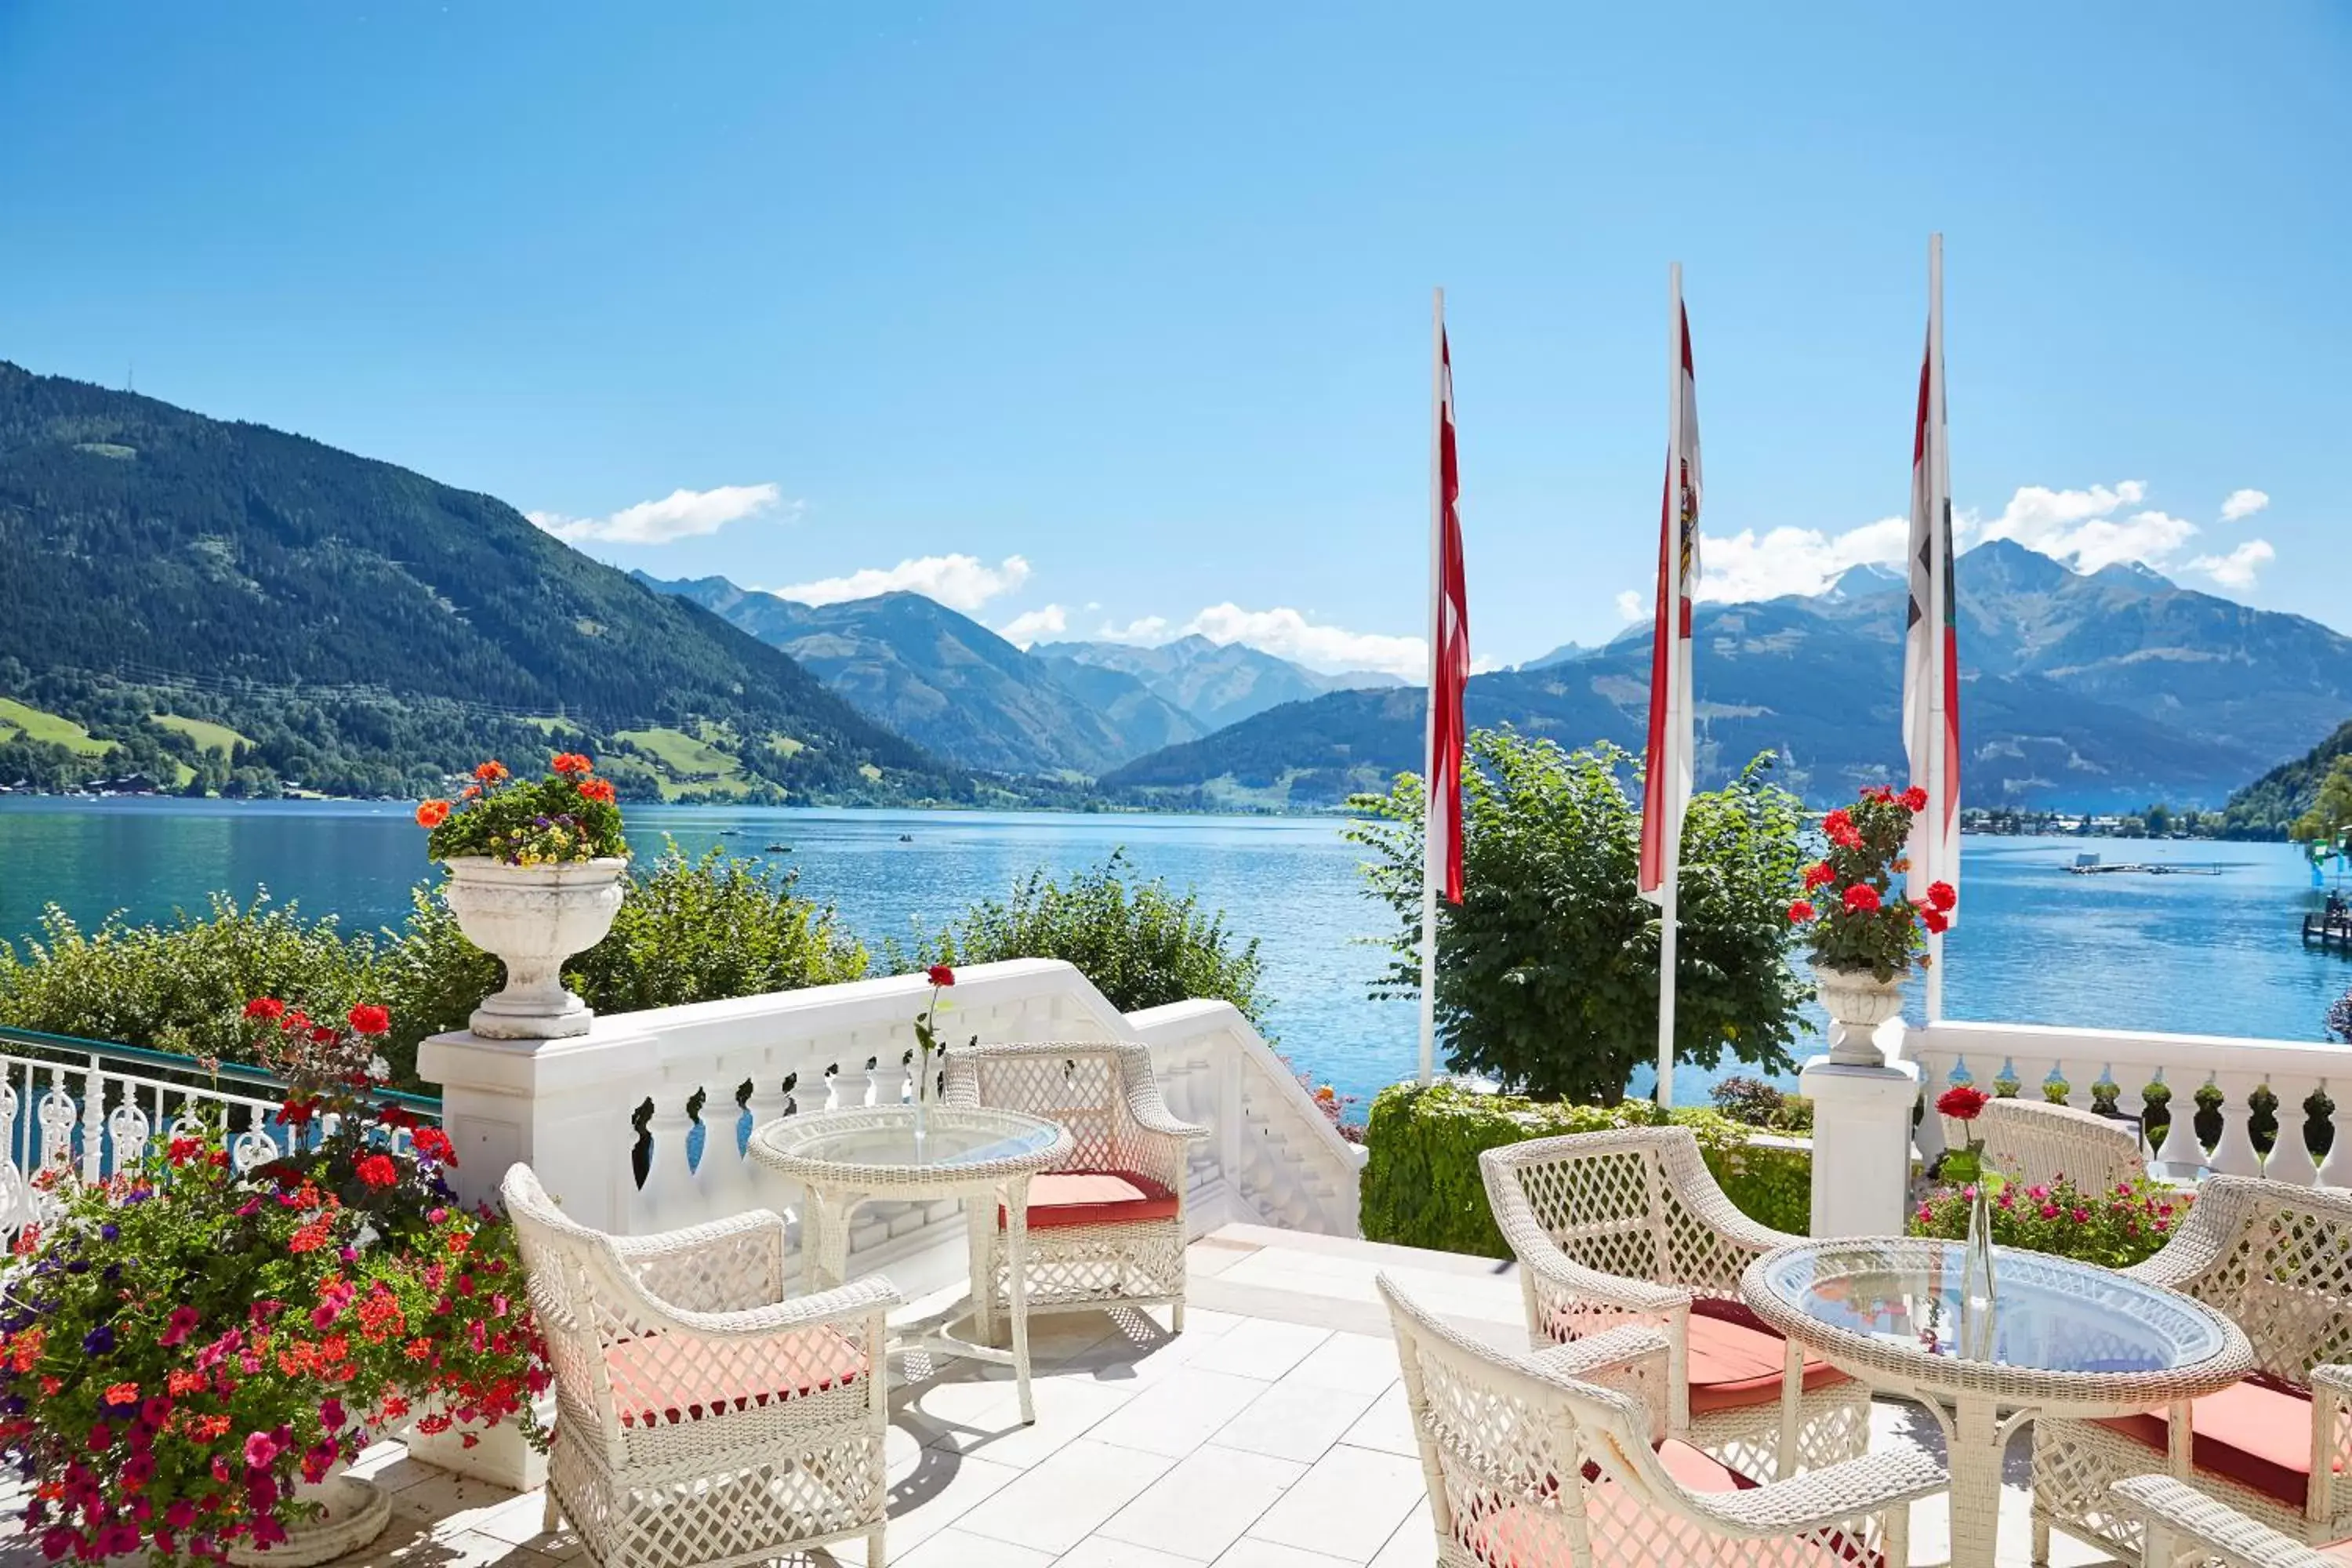 Balcony/Terrace, Patio/Outdoor Area in Grand Hotel Zell am See